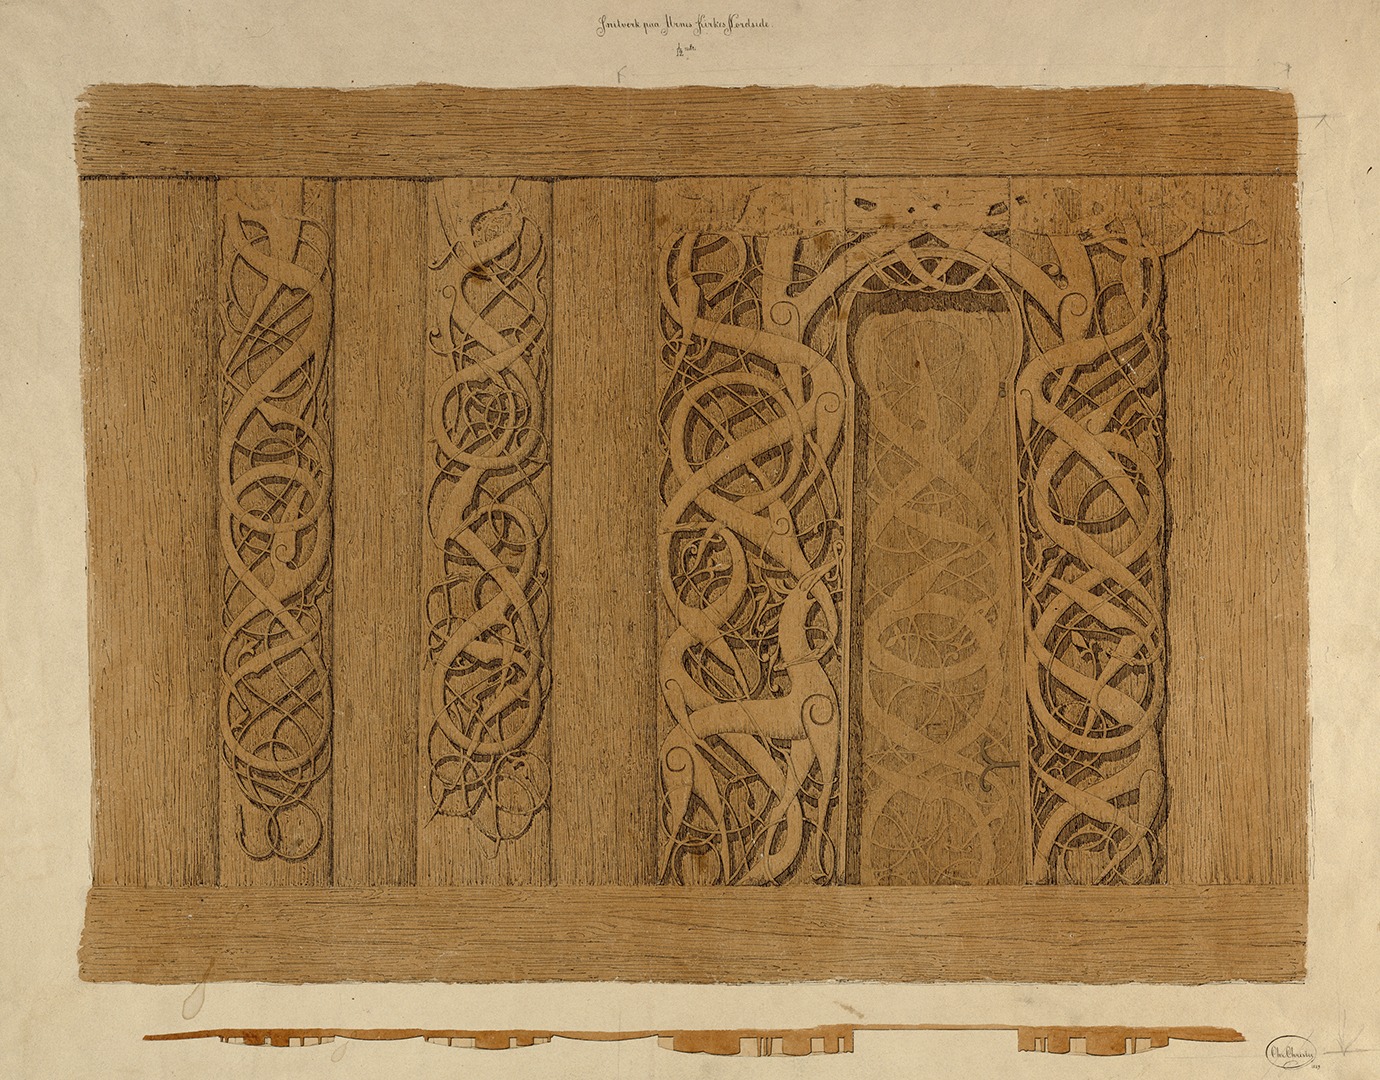 Picture of wood carvings in Urnes Stave Church. Illustration made by Eilert Christian Brodtkorb Christie (1832–1906) from 1859.